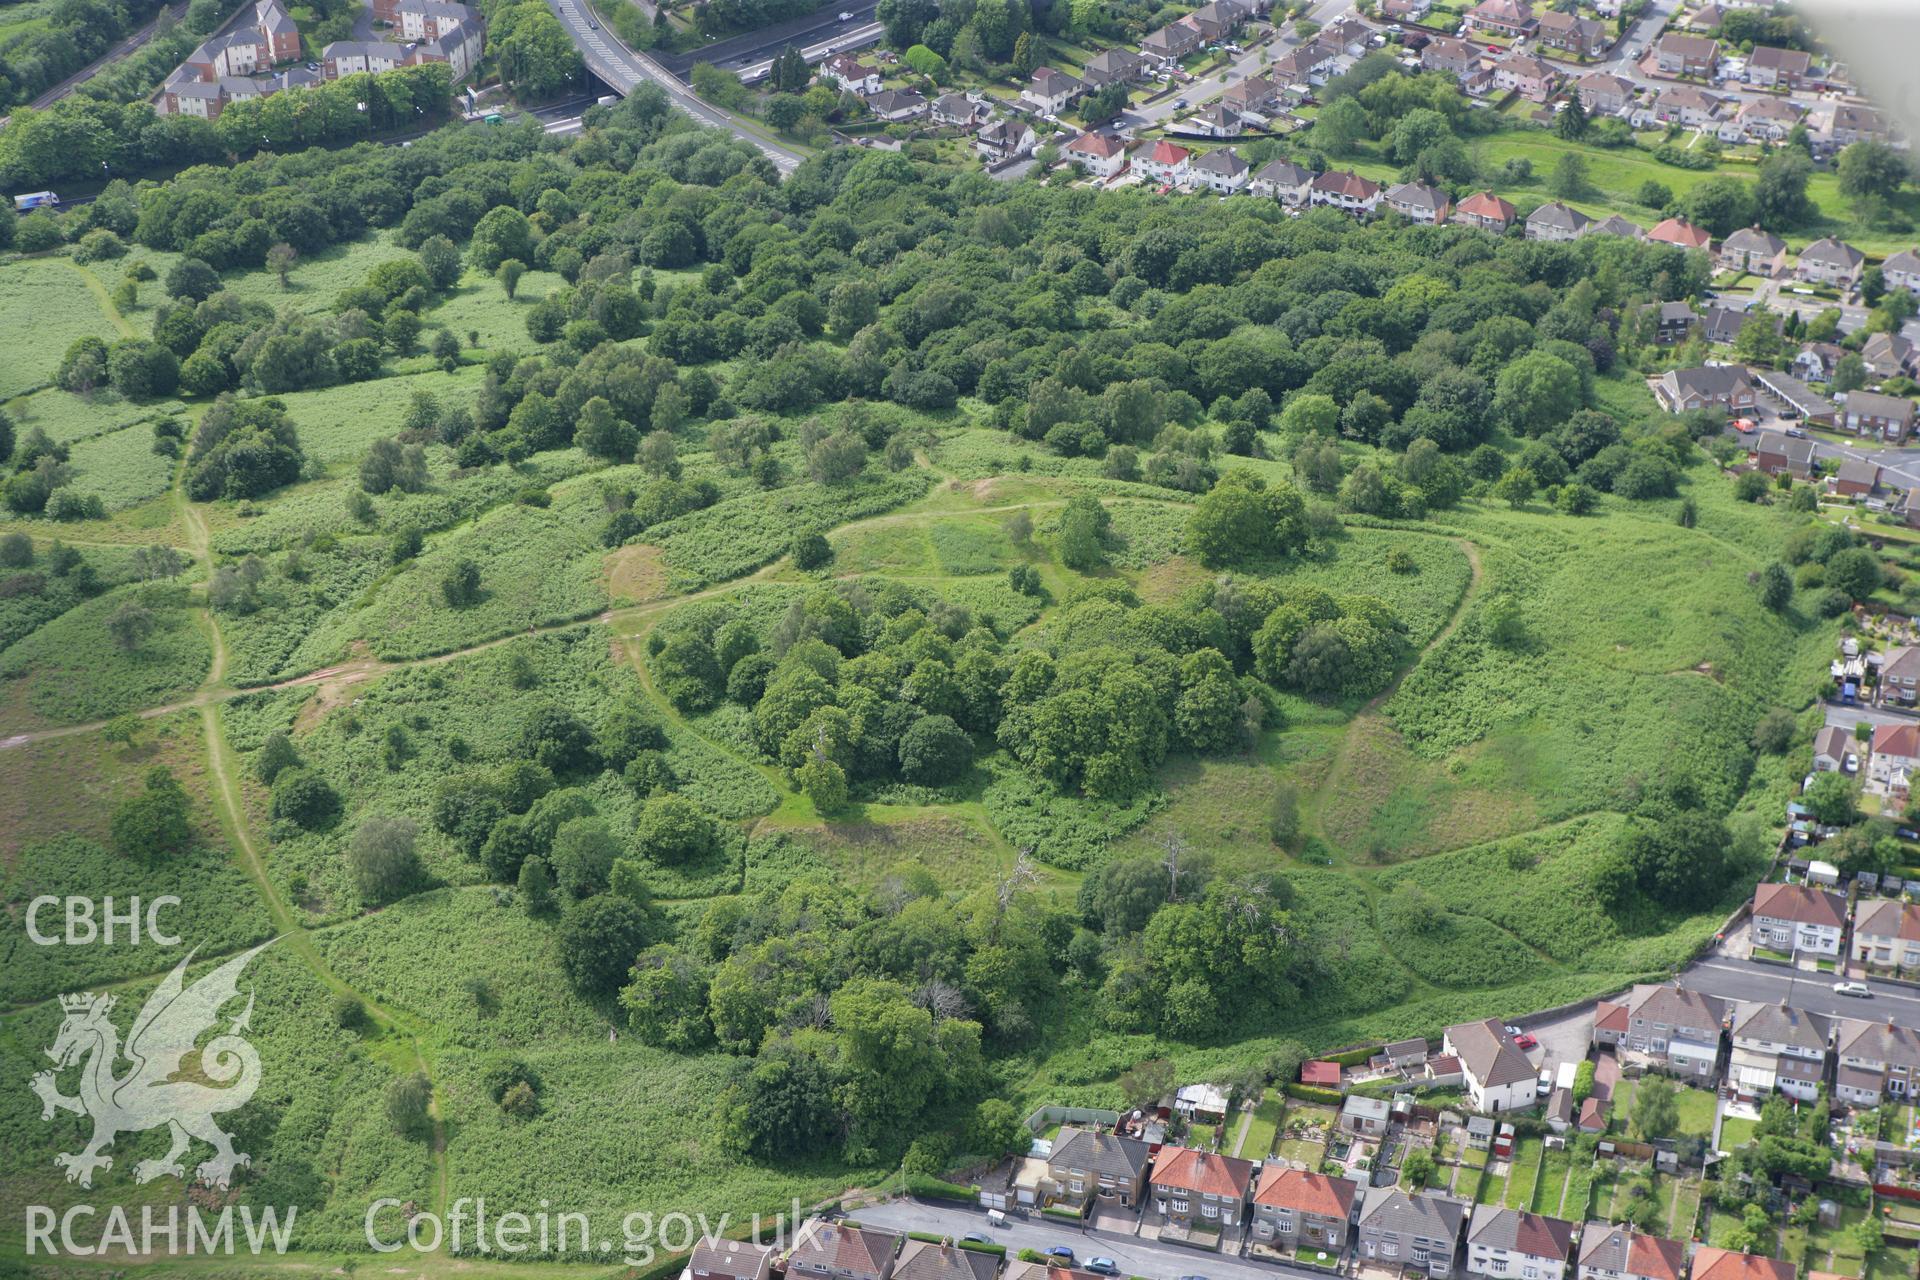 RCAHMW colour oblique photograph of Tredegar Fort. Taken by Toby Driver on 13/06/2011.